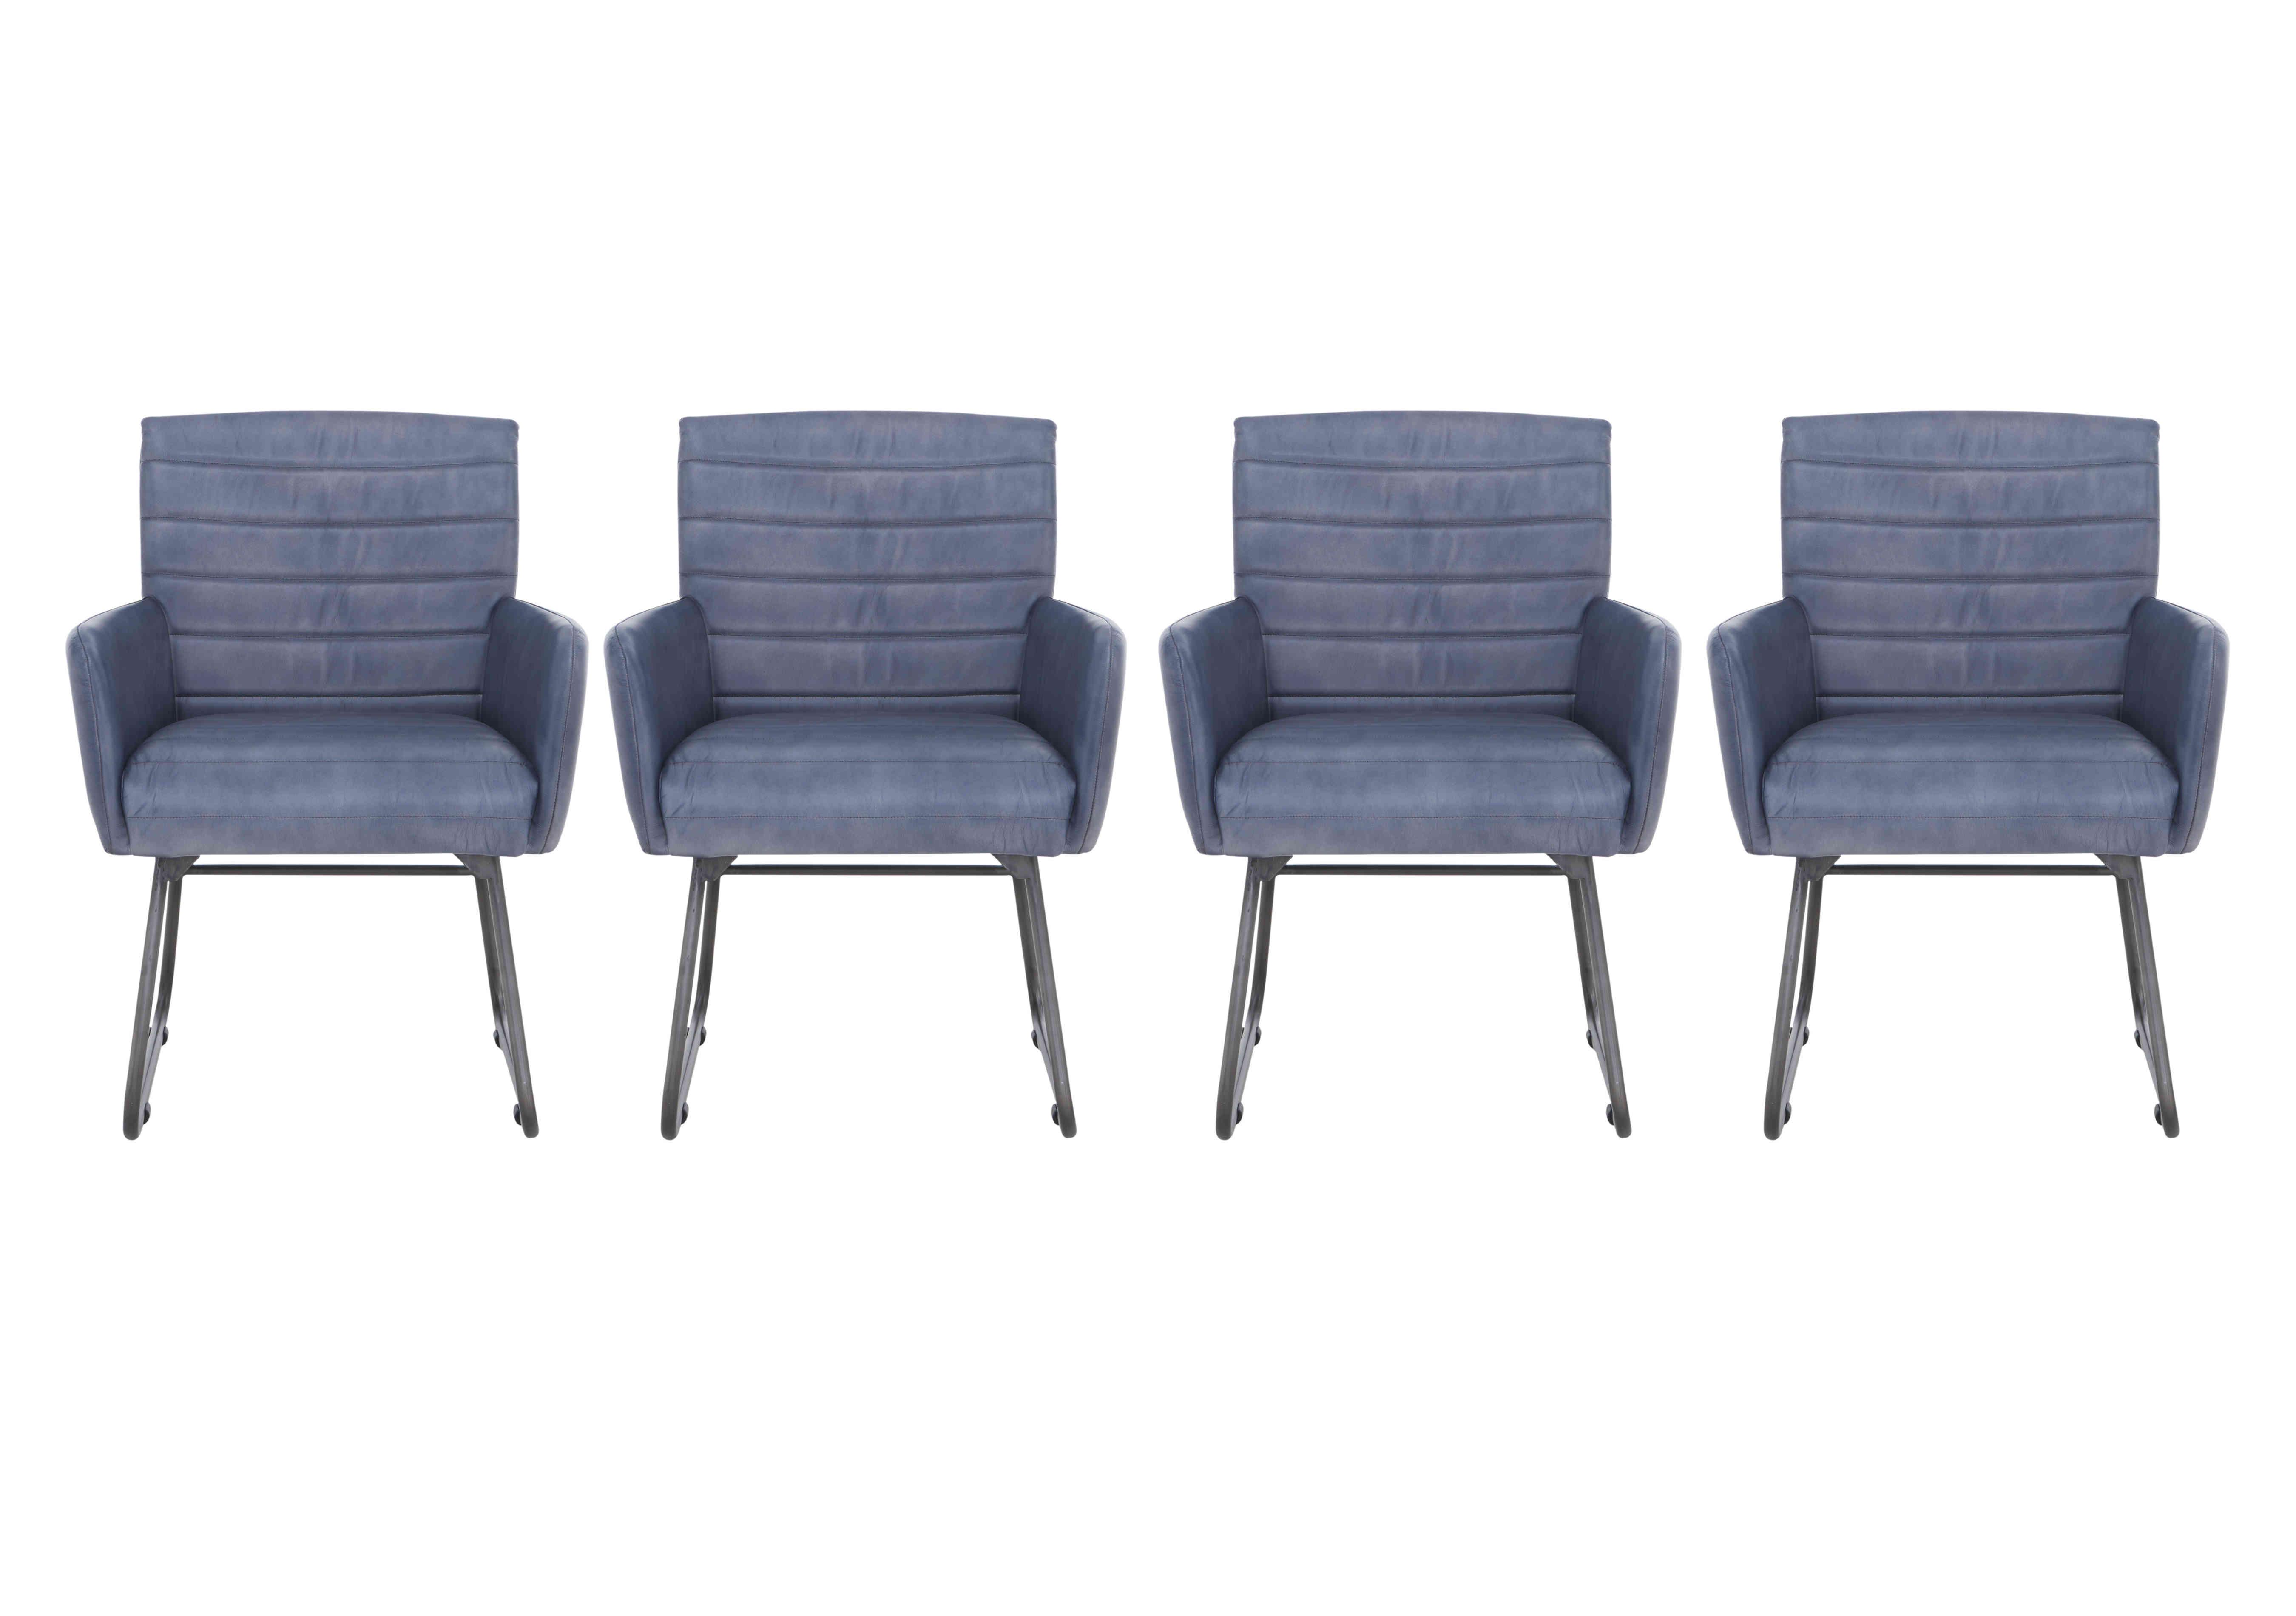 Sam Set of 4 Leather Dining Chairs in Steel Blue on Furniture Village